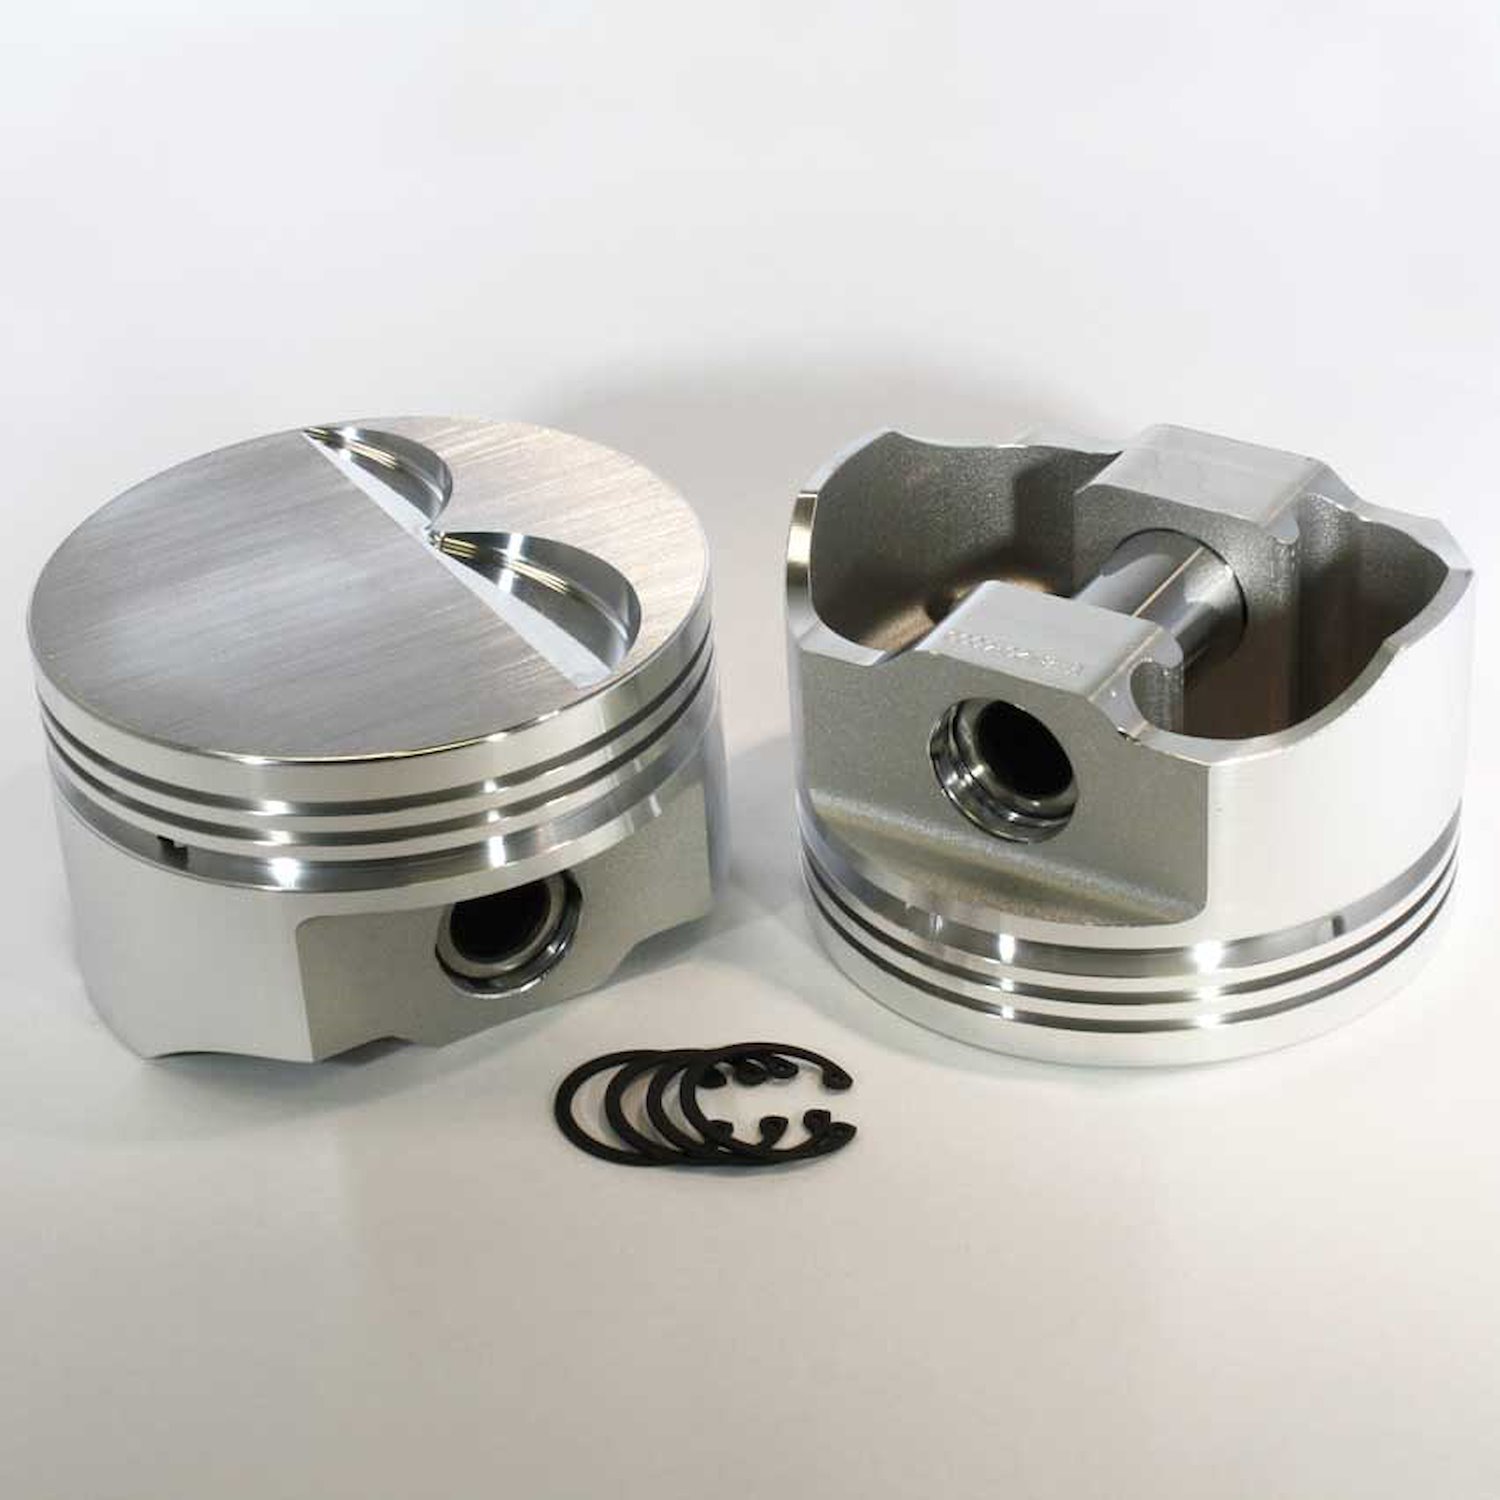 8790-3903 E-Series Flat Top Piston Set for 1997-2005 Chevy LS, 3.903 in. Bore, -3cc Volume [OEM\Stroker]